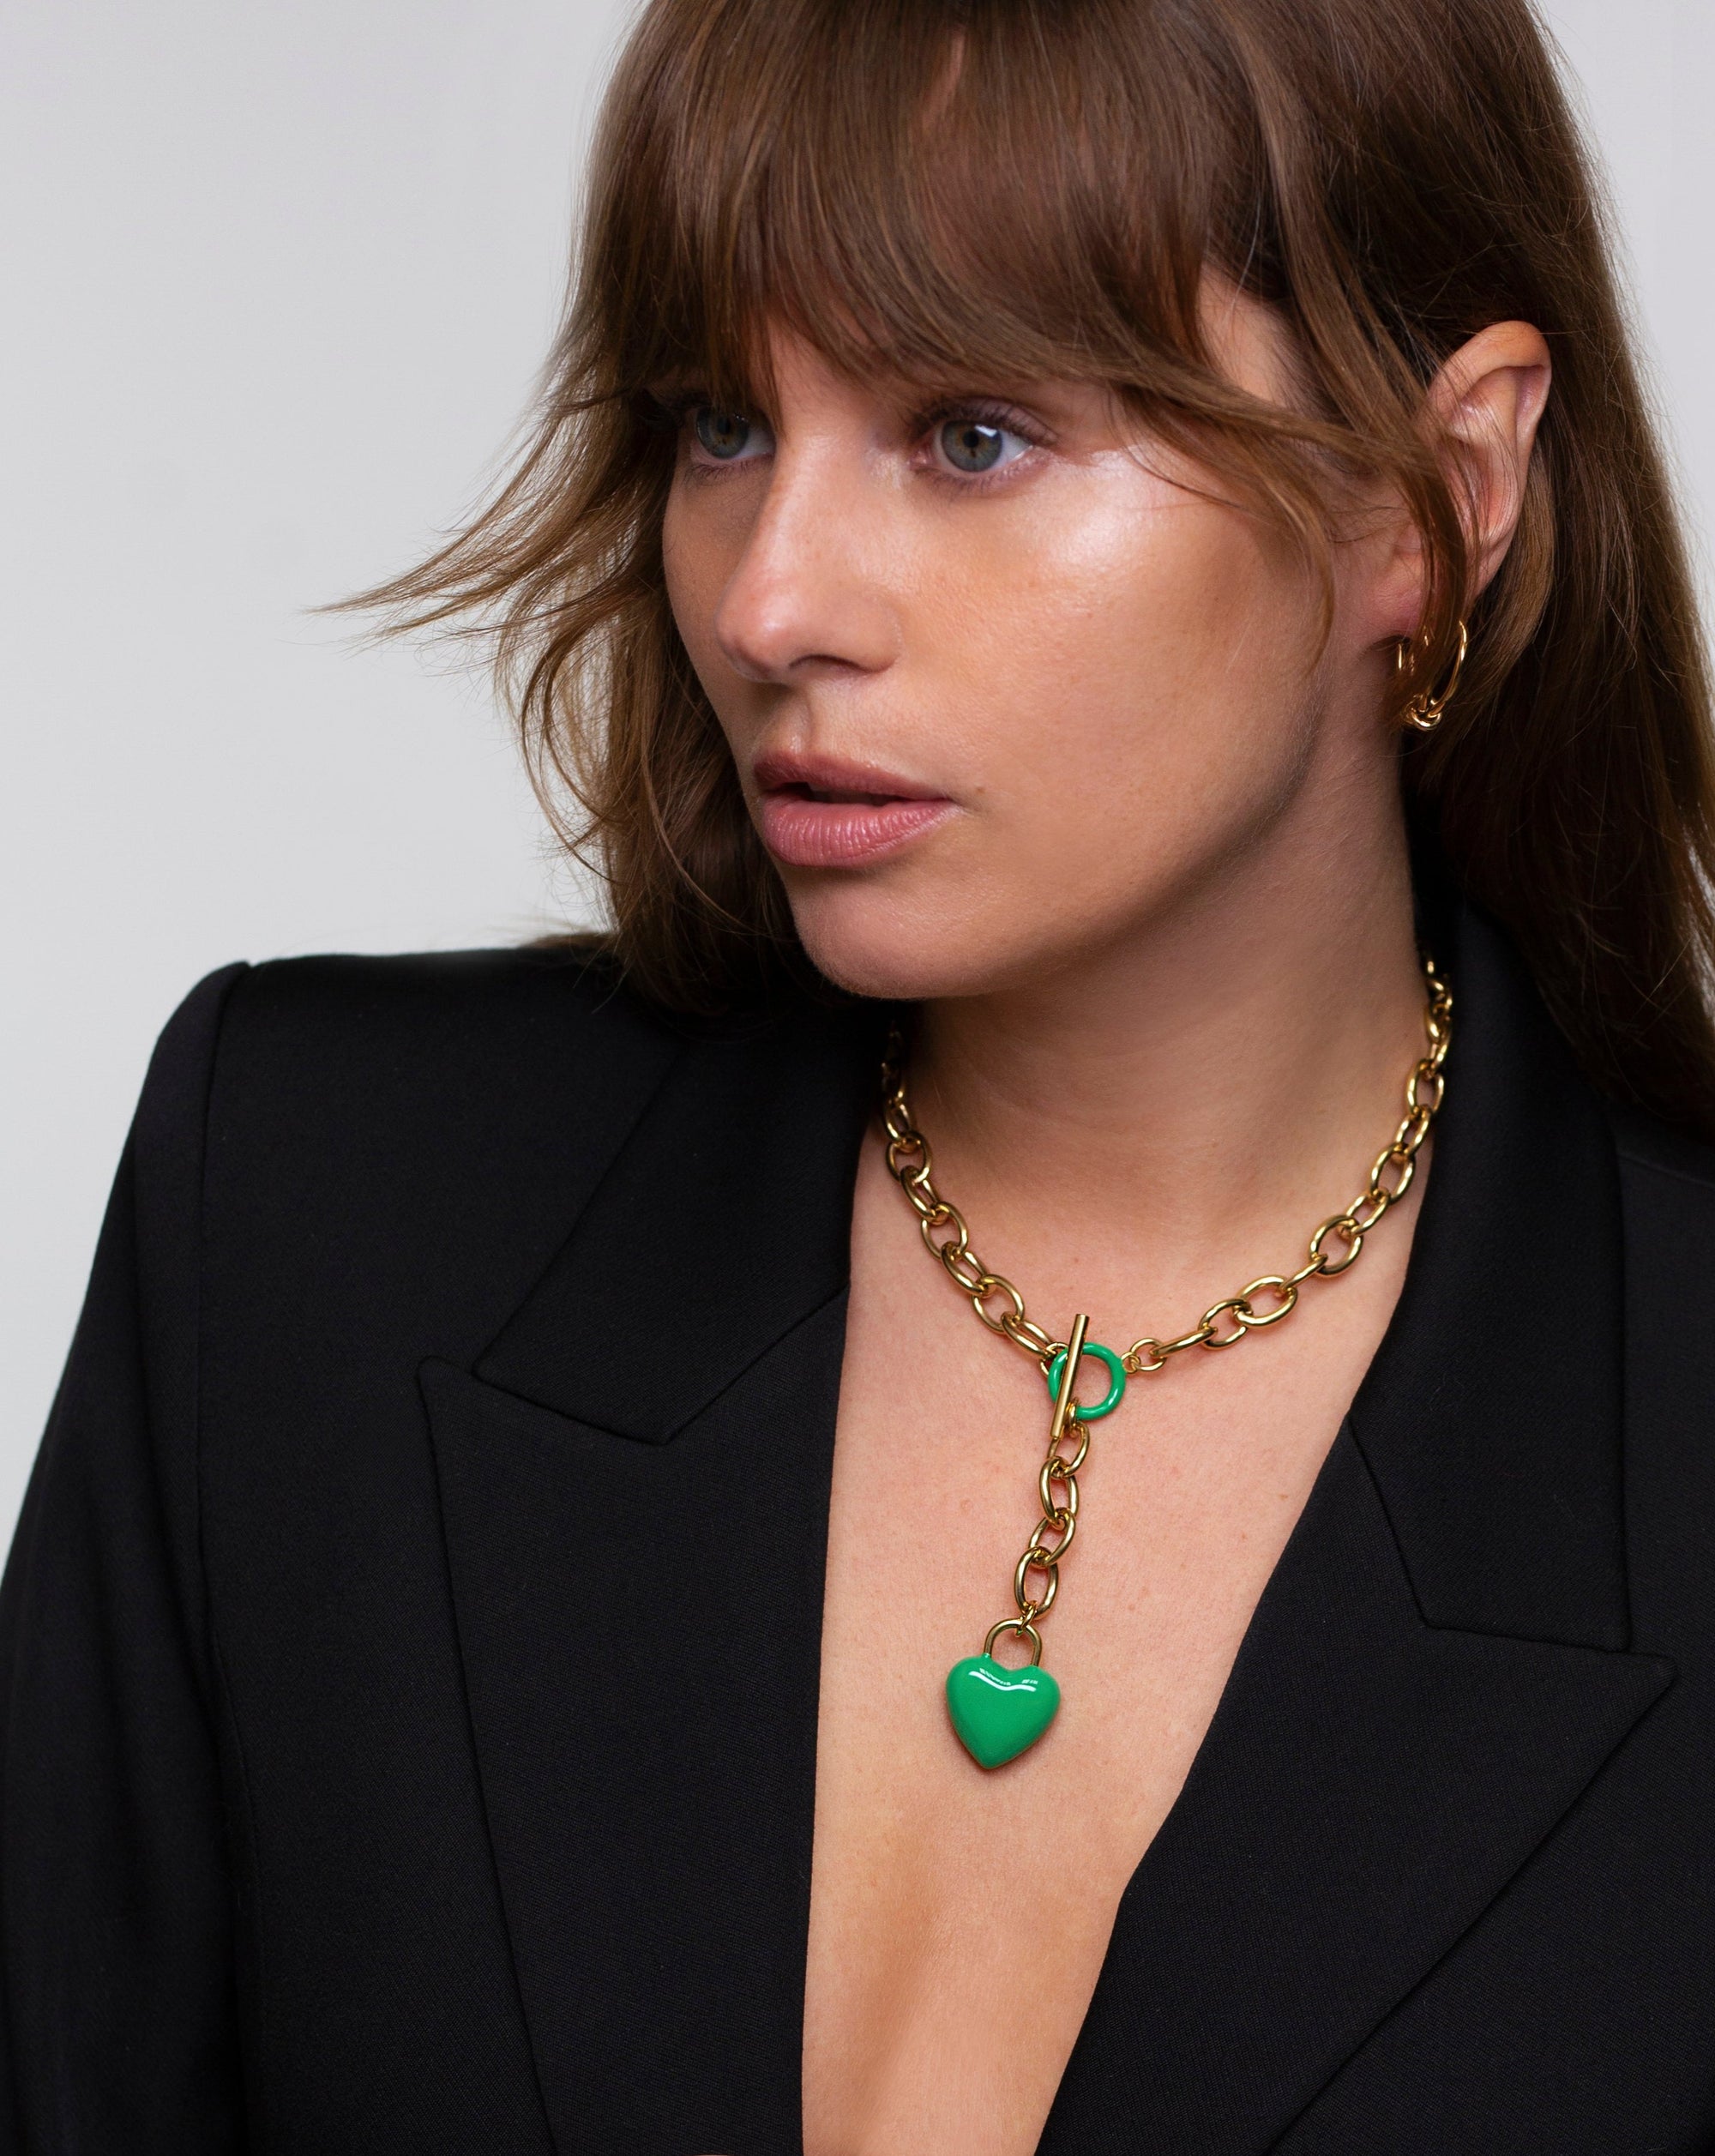 A person with brown hair and a neutral expression wears a black blazer and a chunky gold necklace with an enamel-coated heart-shaped pendant from For Art's Sake®, called The Kiss Necklace Pink. The individual also has a gold hoop earring visible on the right ear. The background is plain white.